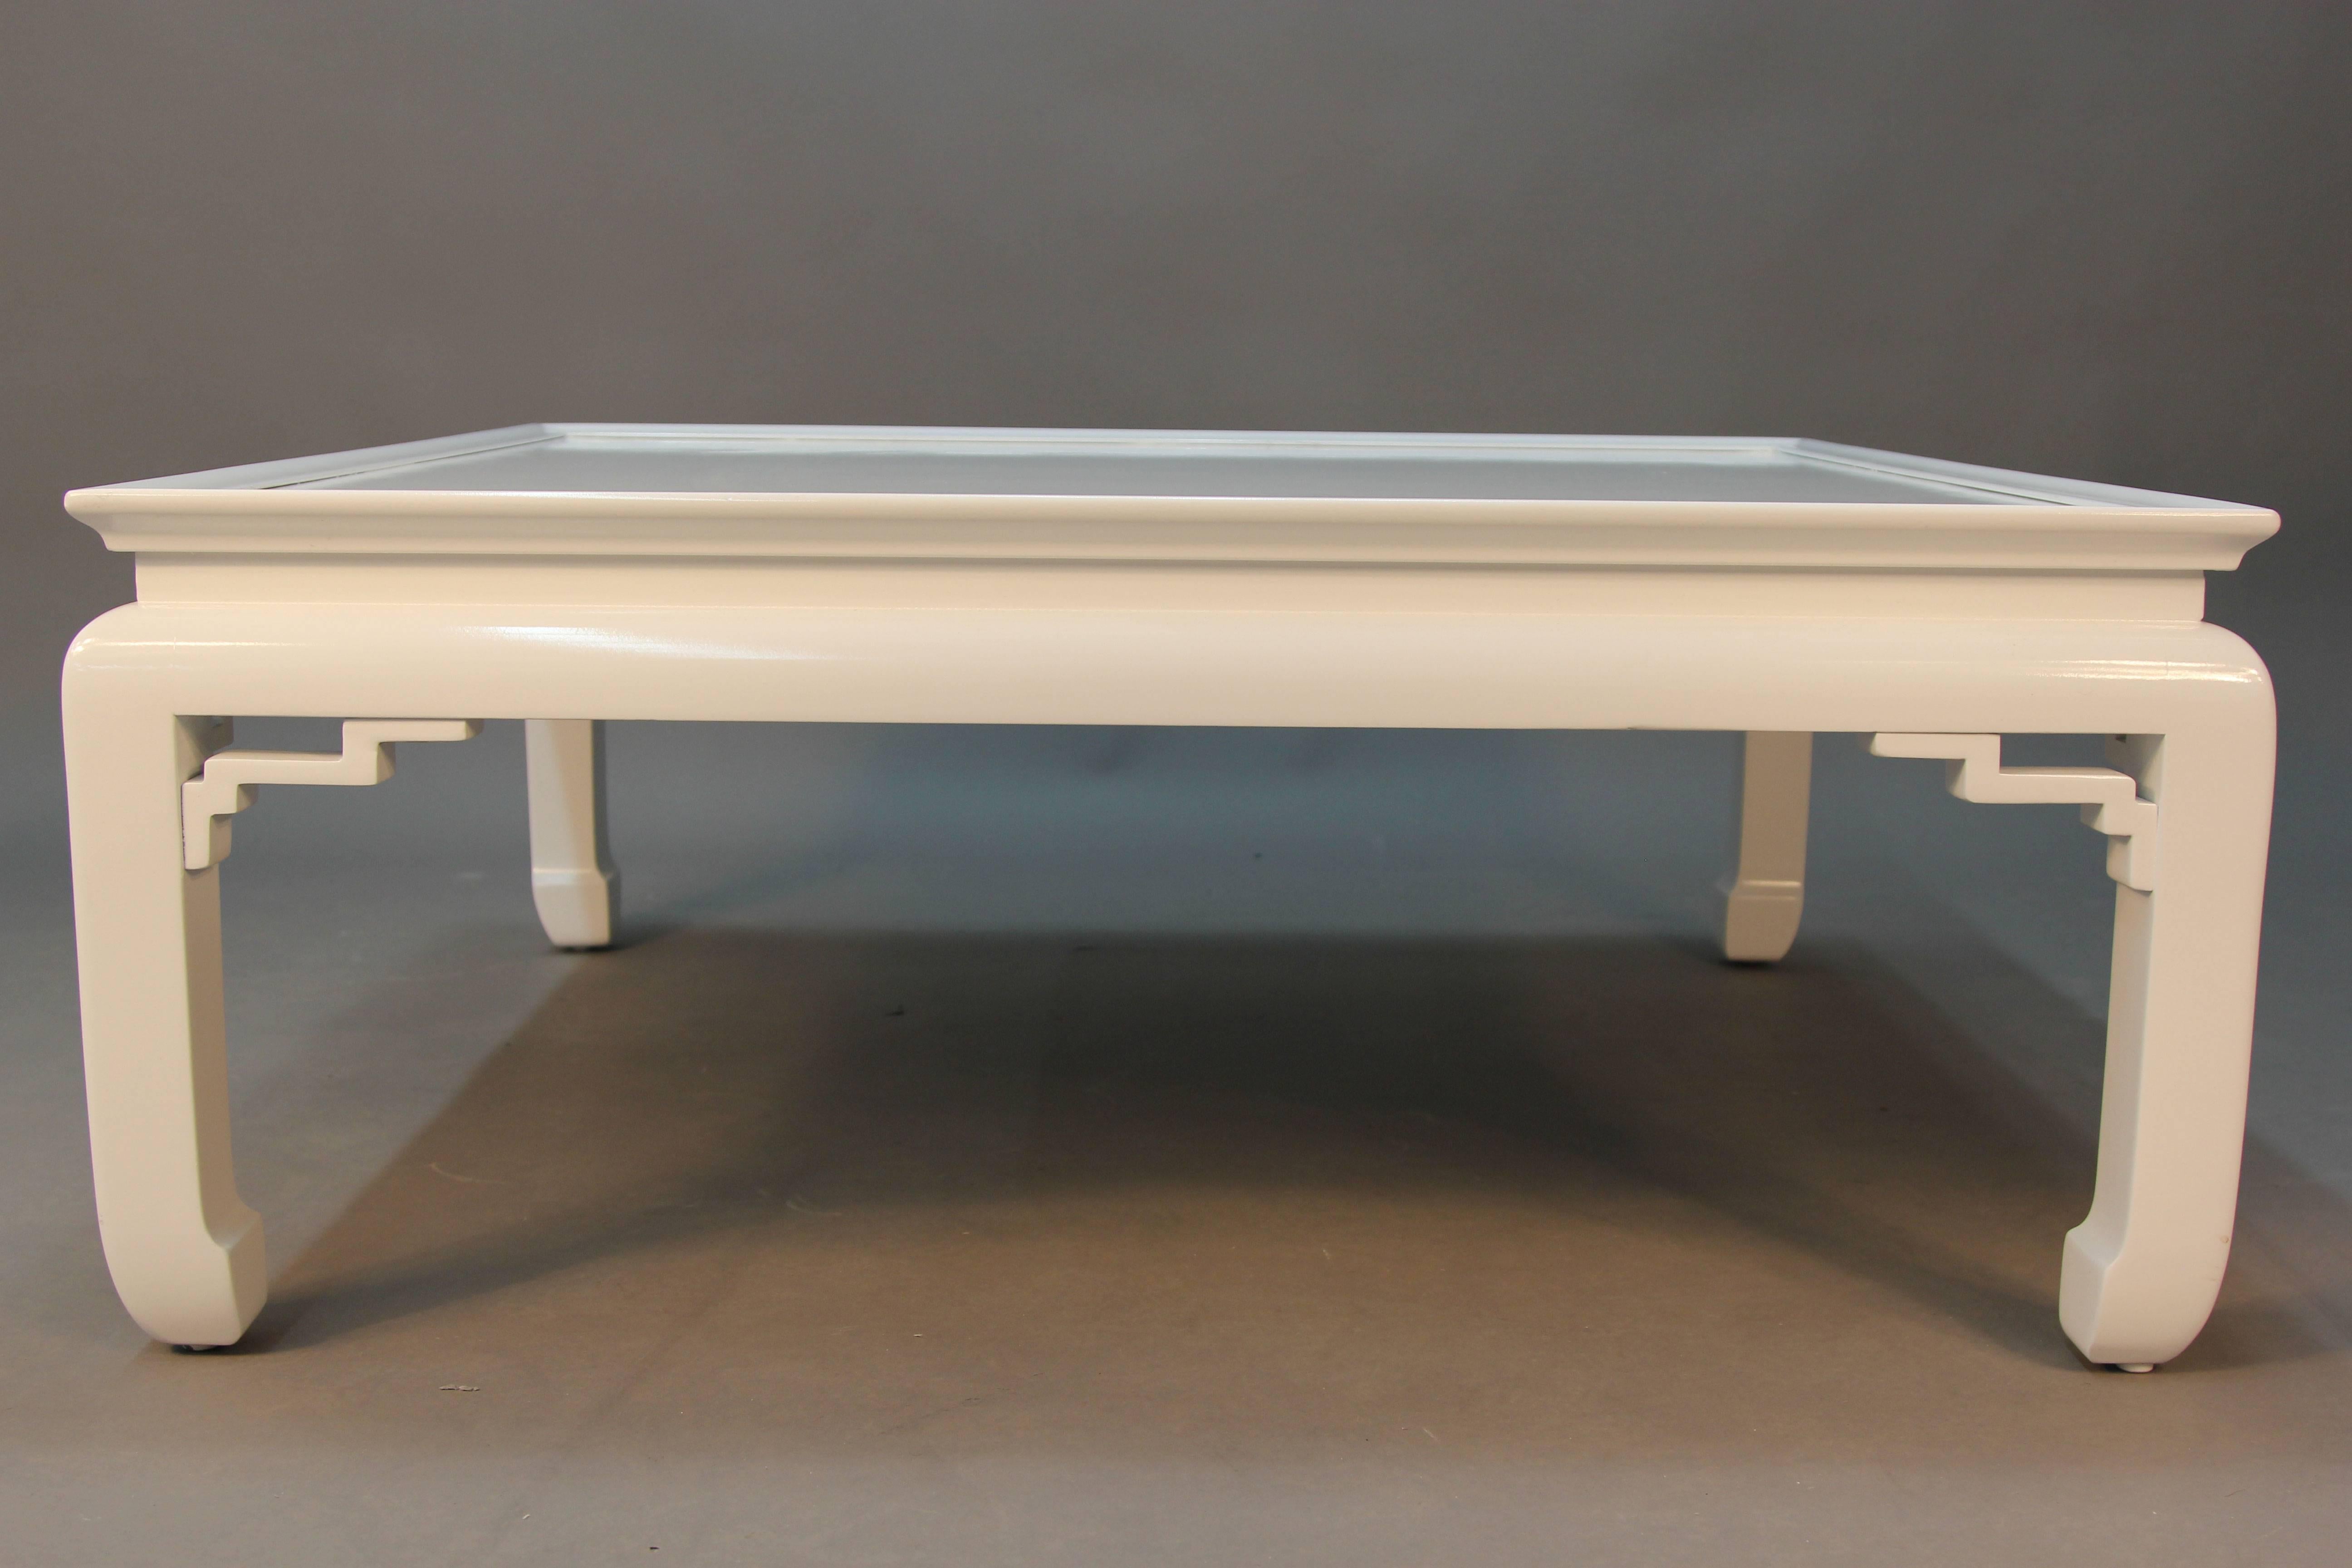 A super chic white lacquered coffee table with Asian detailed legs and design.